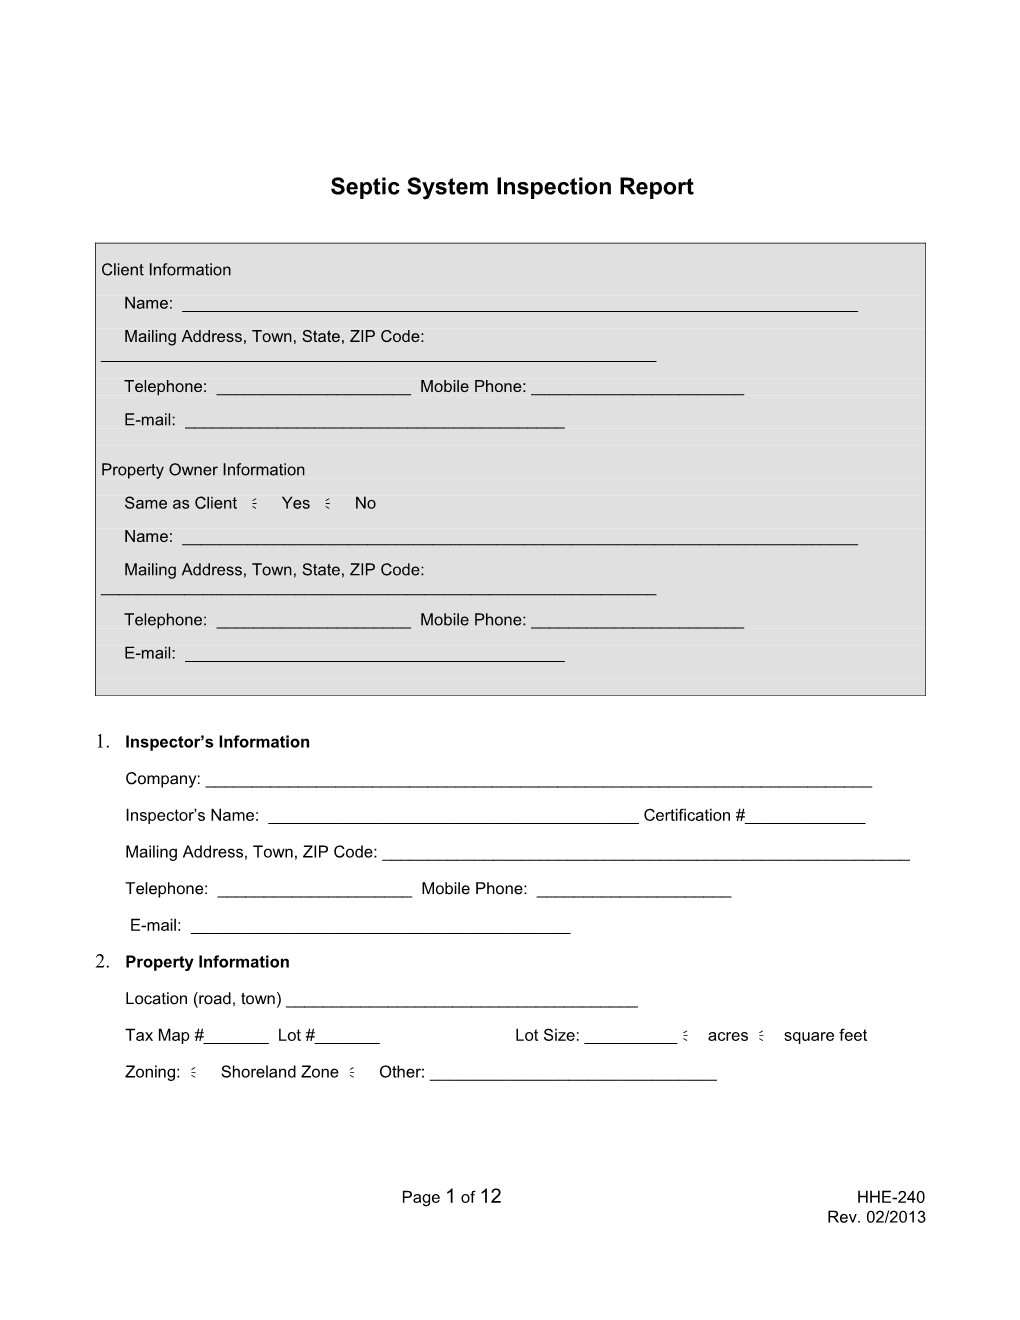 Septic System Inspection Report